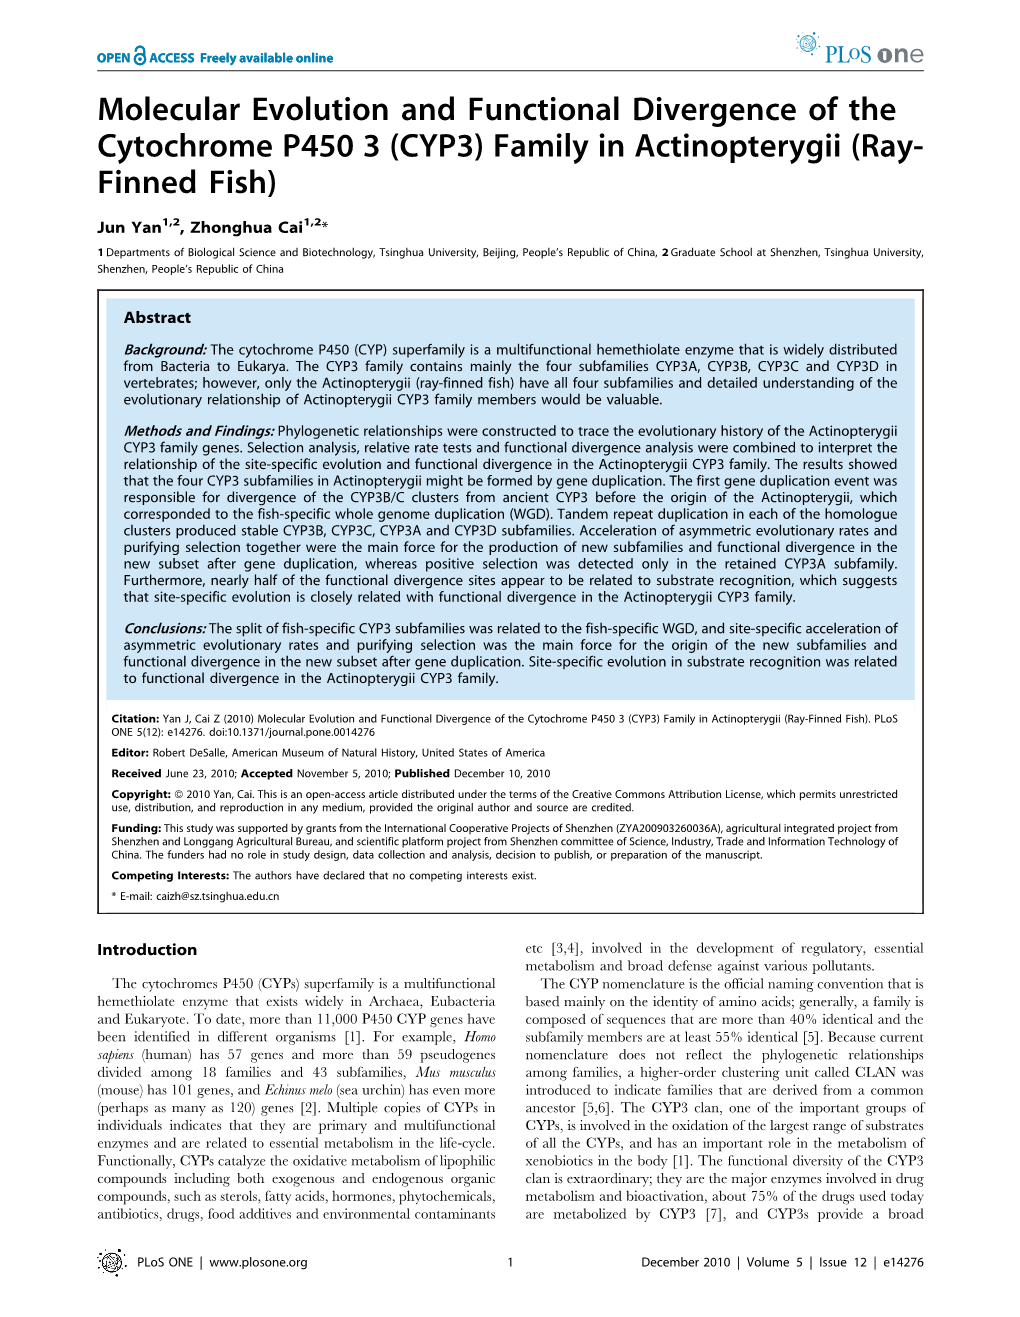 CYP3) Family in Actinopterygii (Ray- Finned Fish